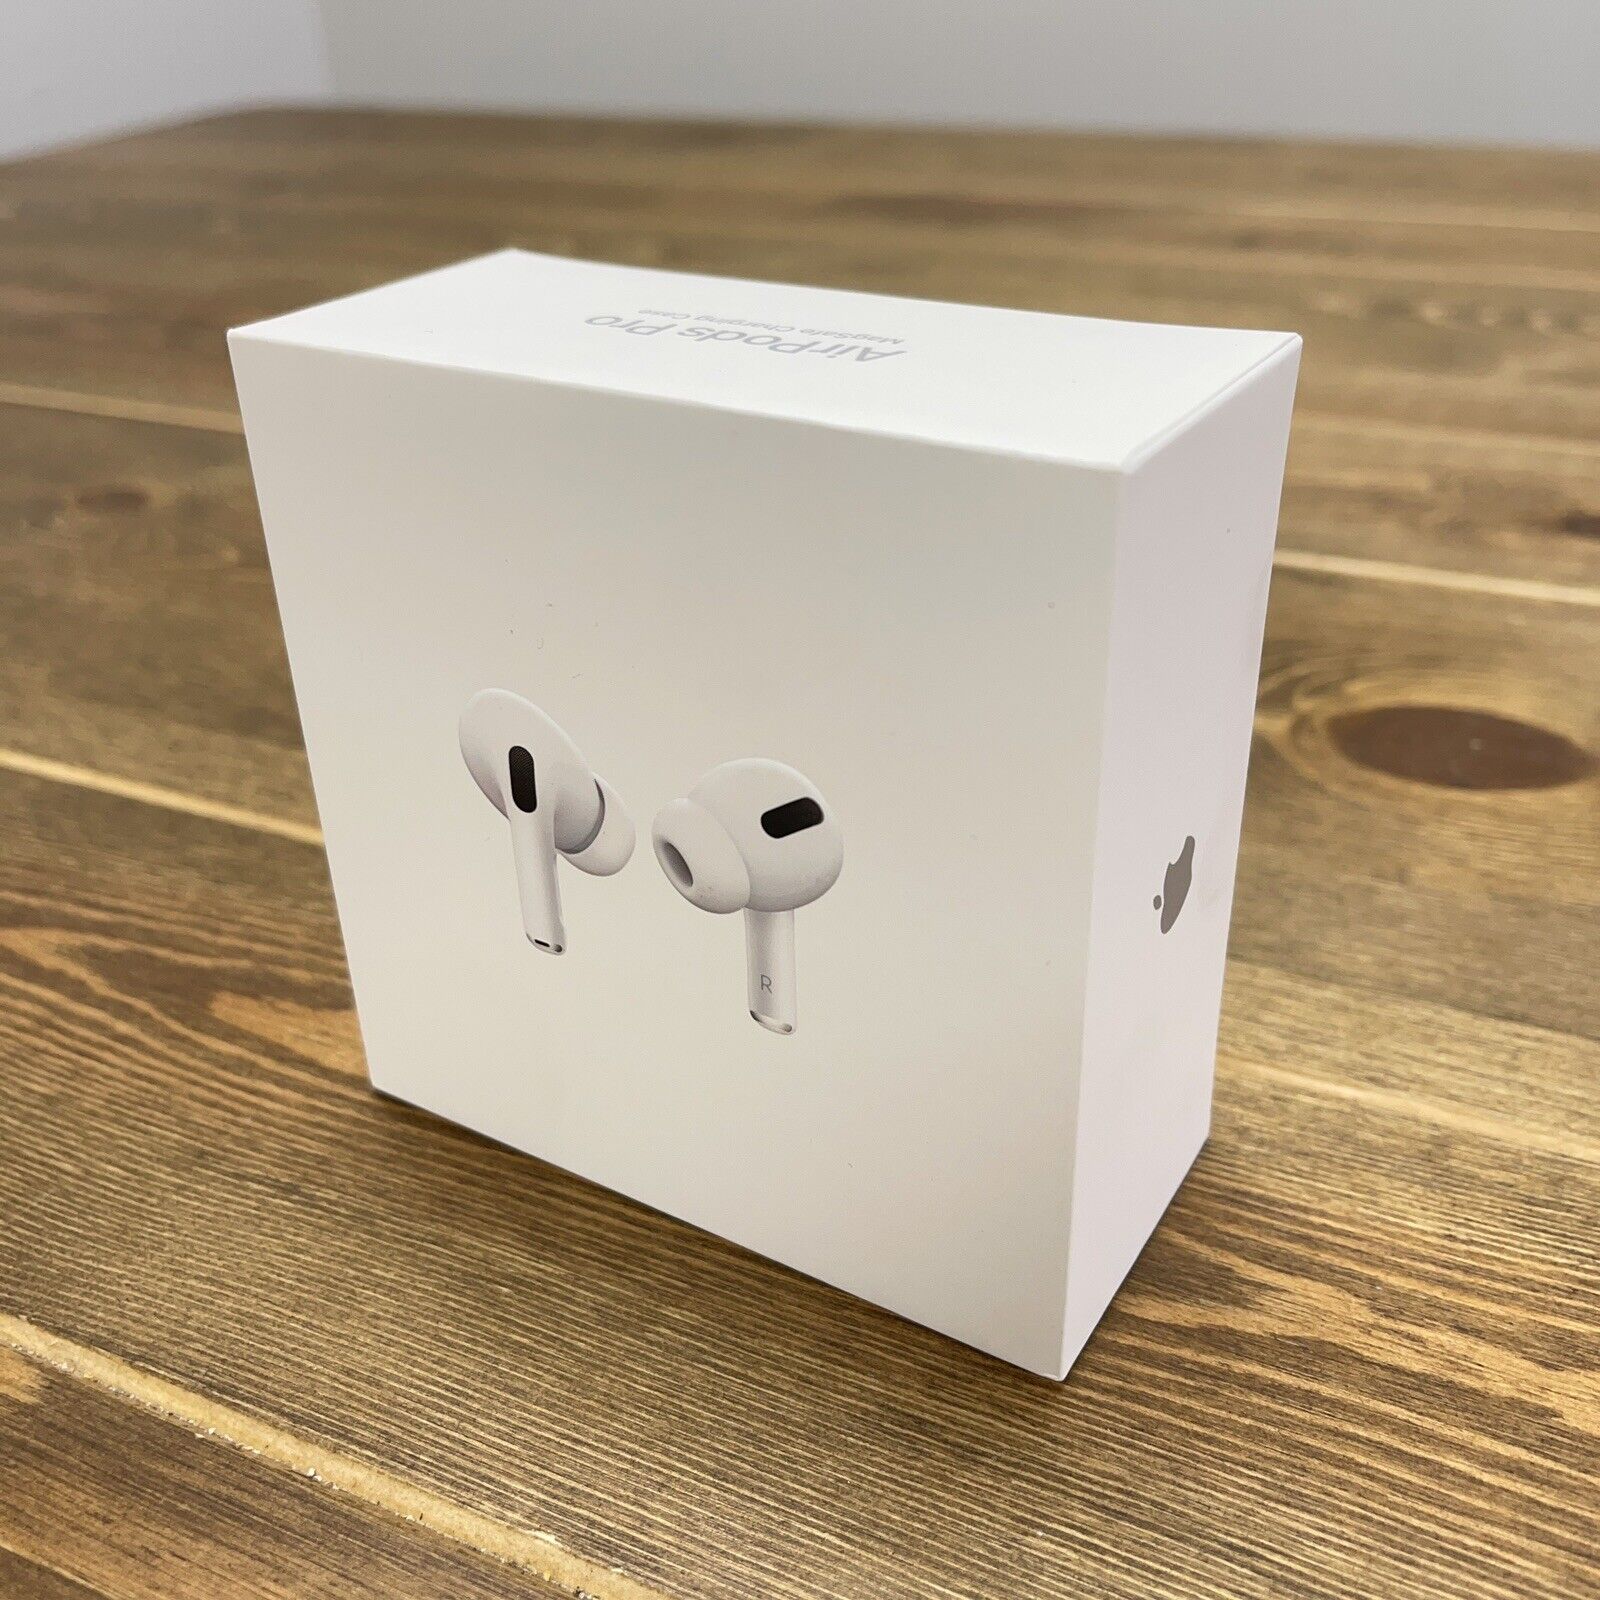 Apple AirPods Pro - EMPTY Box with Contents: USB-C Cable & Docs